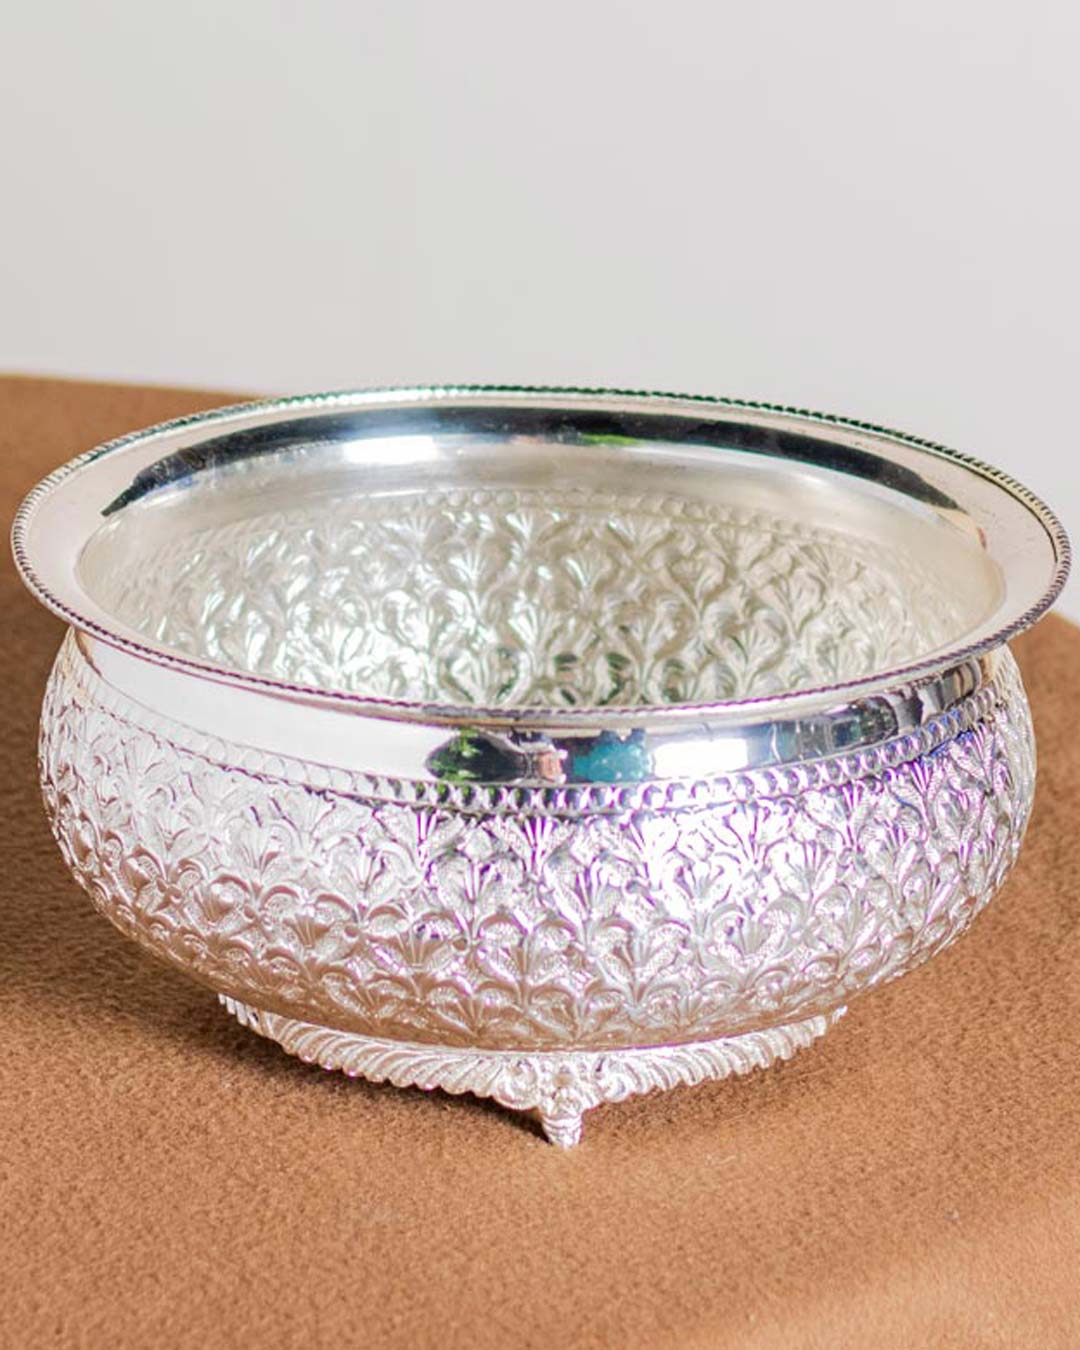 Foliole Embossed Silver Plated Brass Bowl - 10"